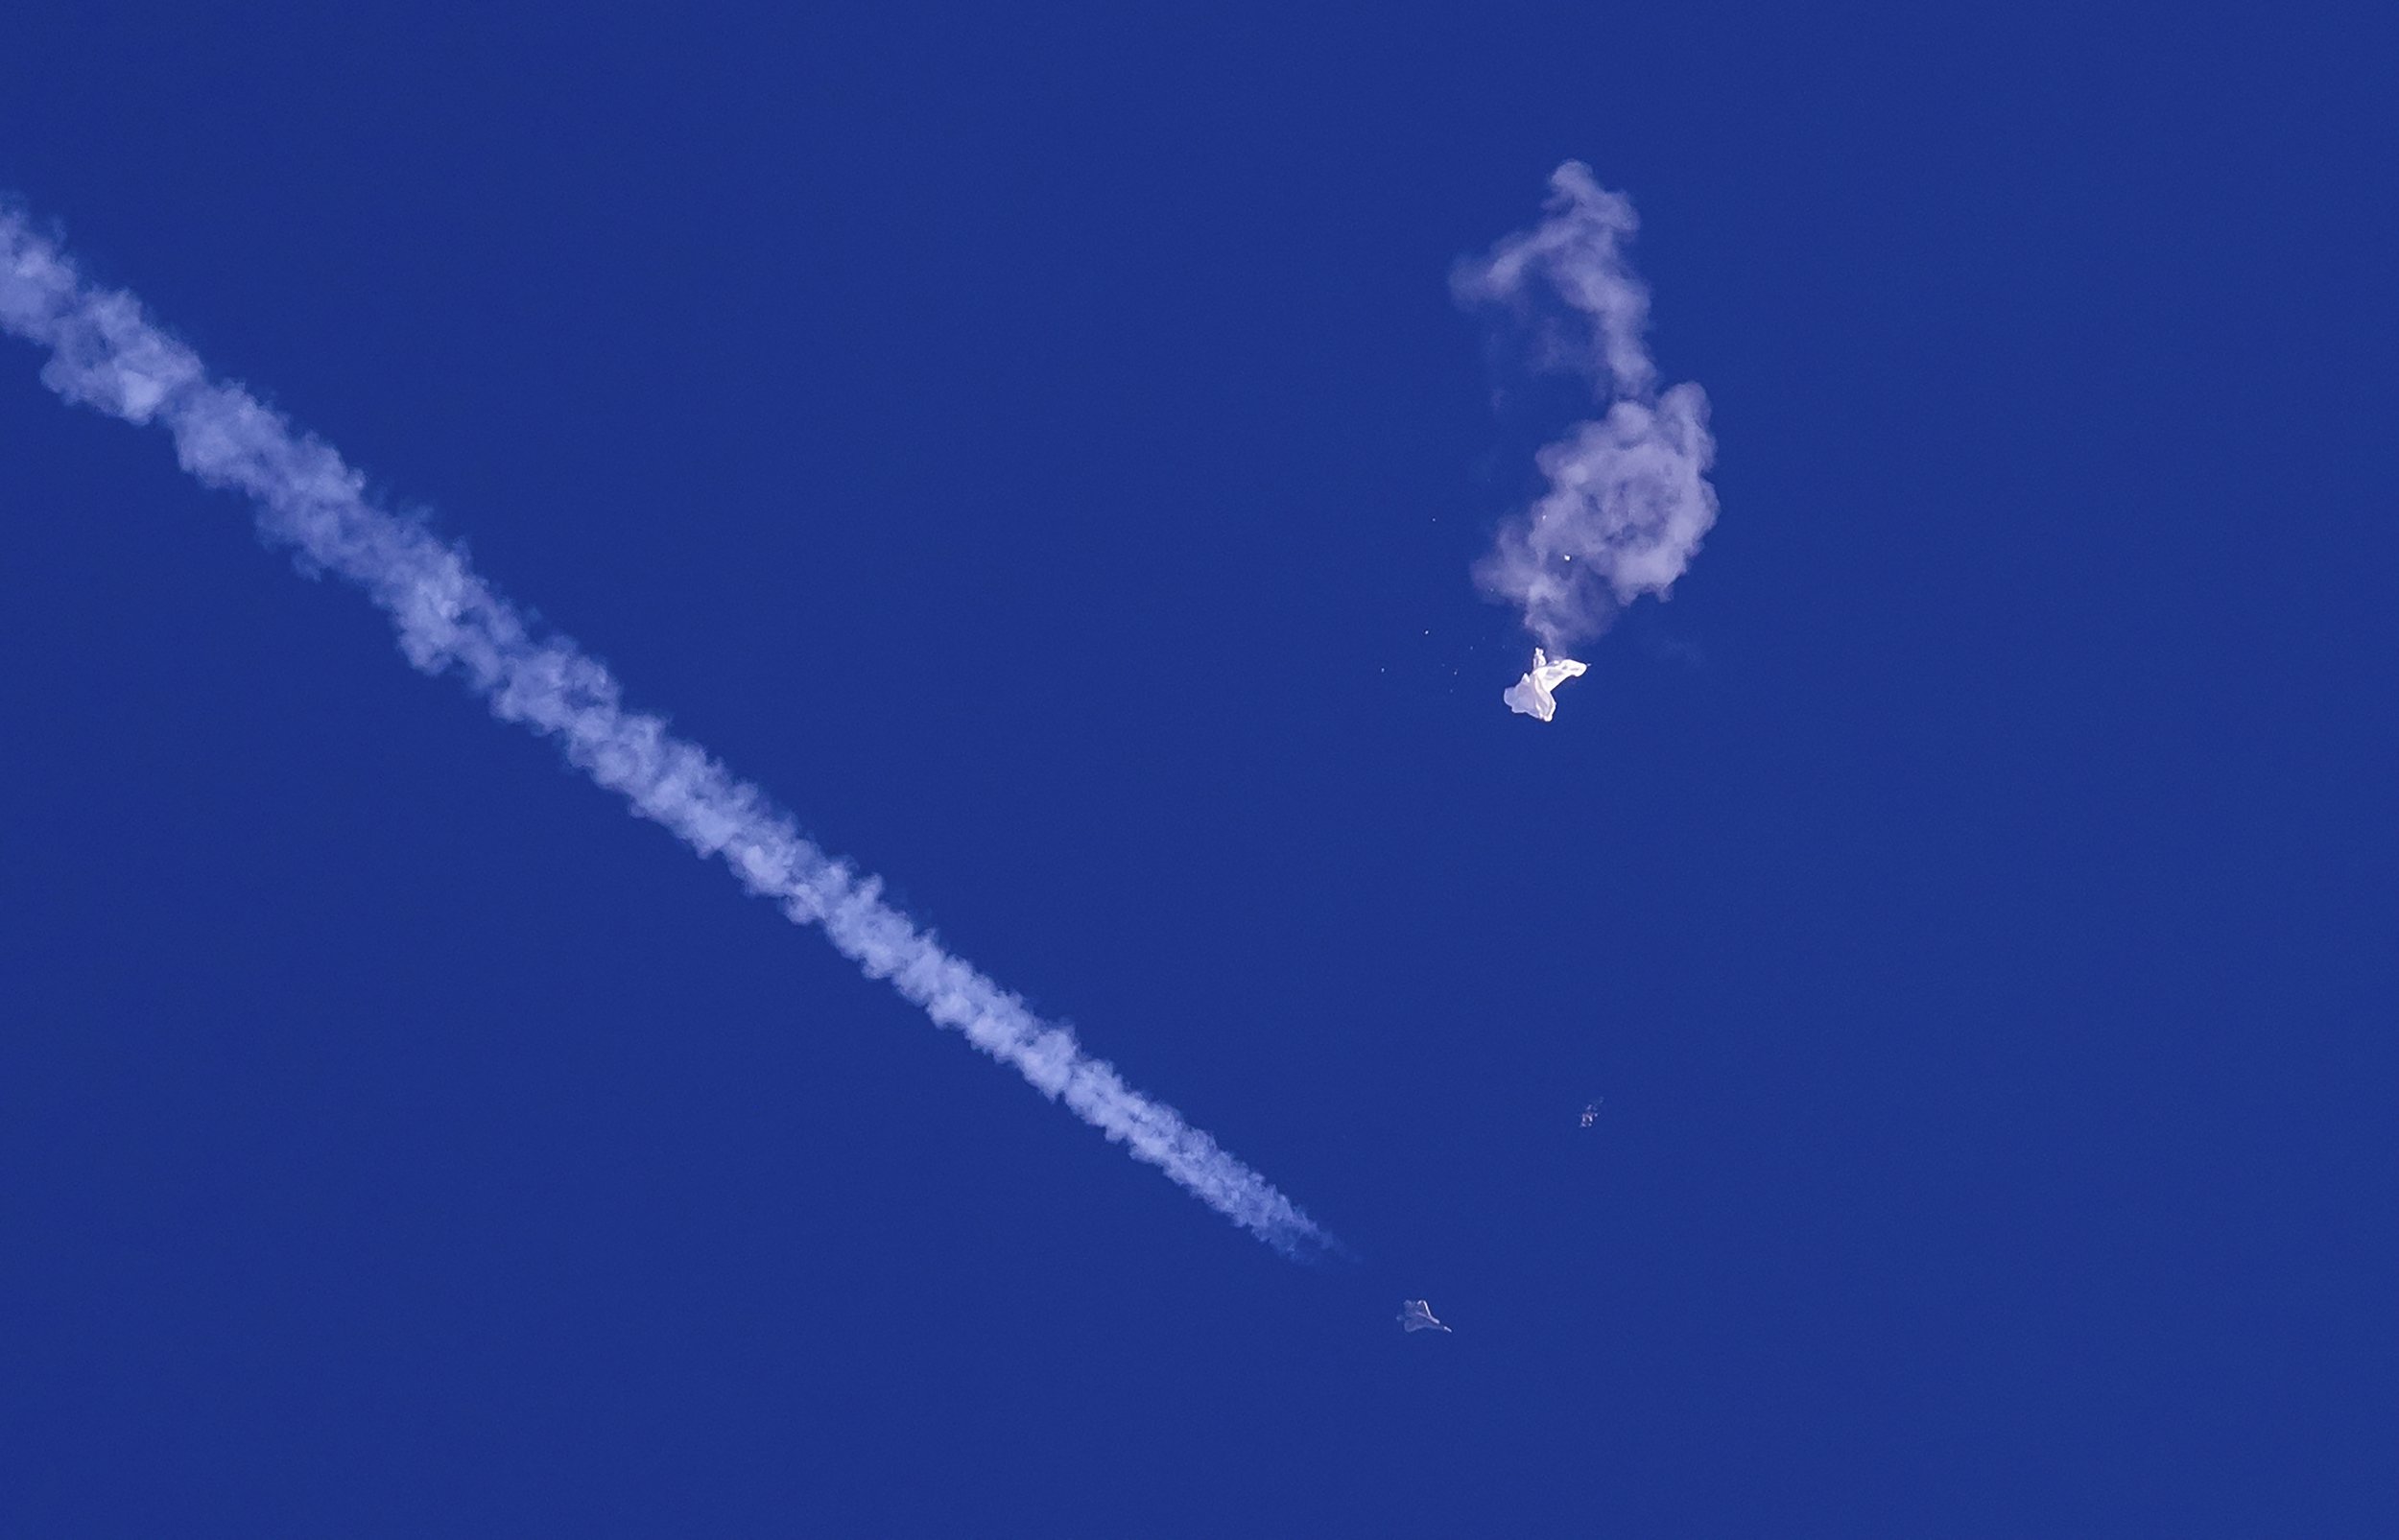  A fighter jet flies past the remnants of a large balloon after it was shot down above the Atlantic Ocean, just off the coast of Myrtle Beach, S.C., on Feb. 4, 2023. The Chinese balloon was part of a large surveillance program that China has been con